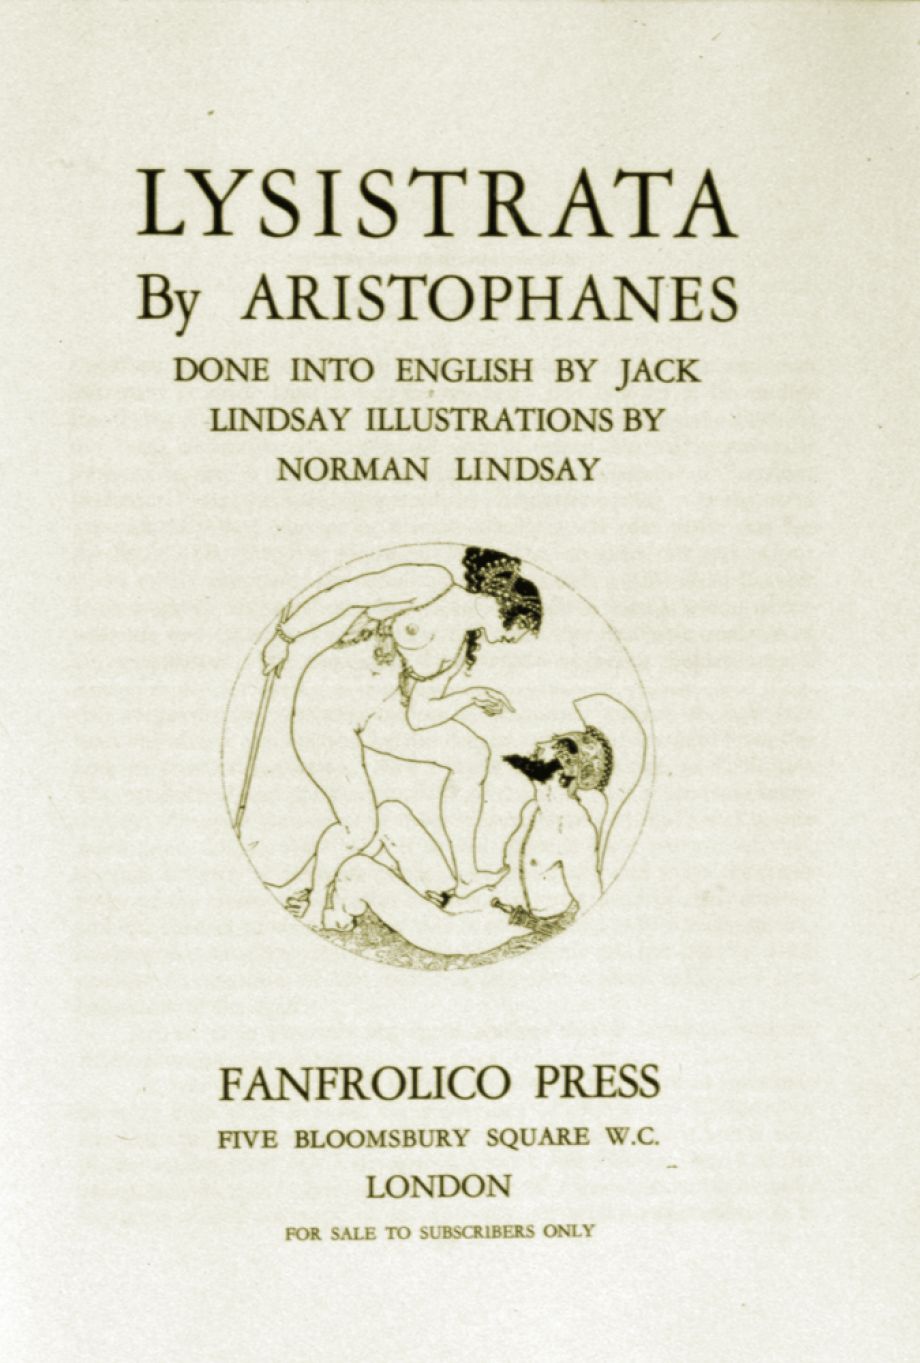 Lysistrata by Aristophanes (Fanfrolico Press)